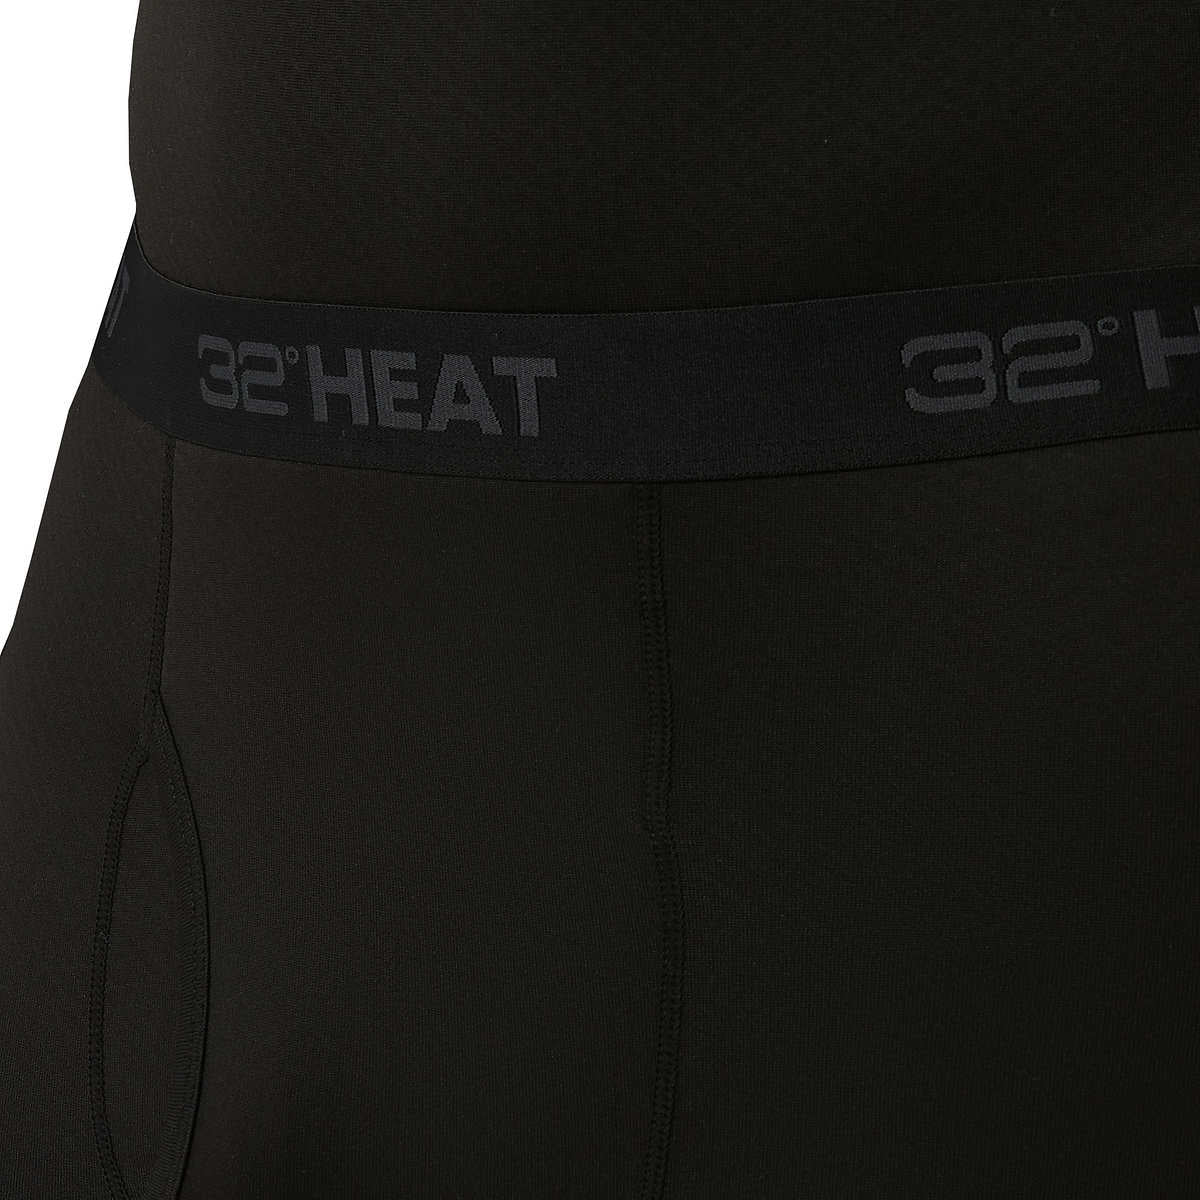 32 Degrees Heat Men's 2-pack Quick Dry Soft Fleece Lined Base Layer Pants